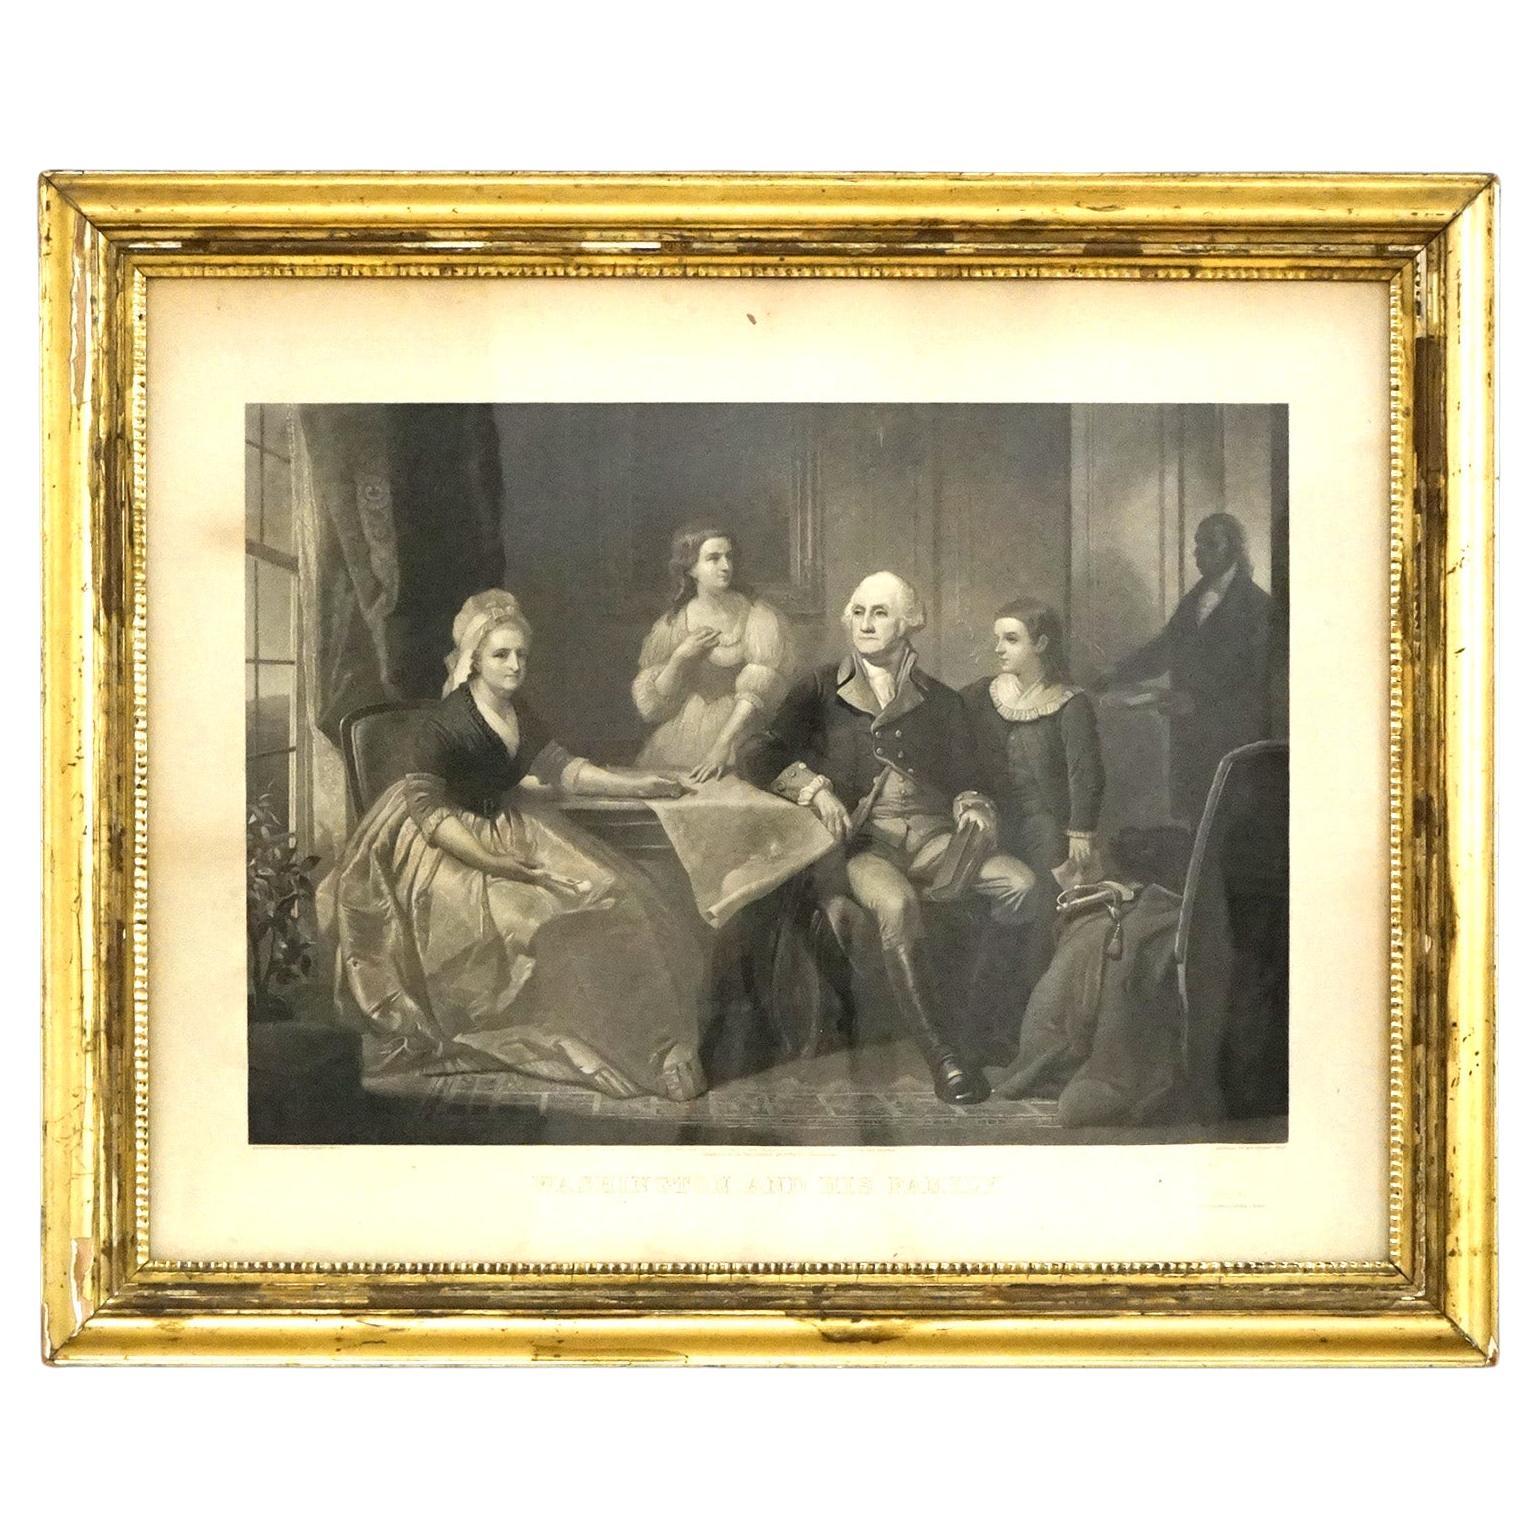 Antique Etching Proof, “Washington And His Family” 19thC